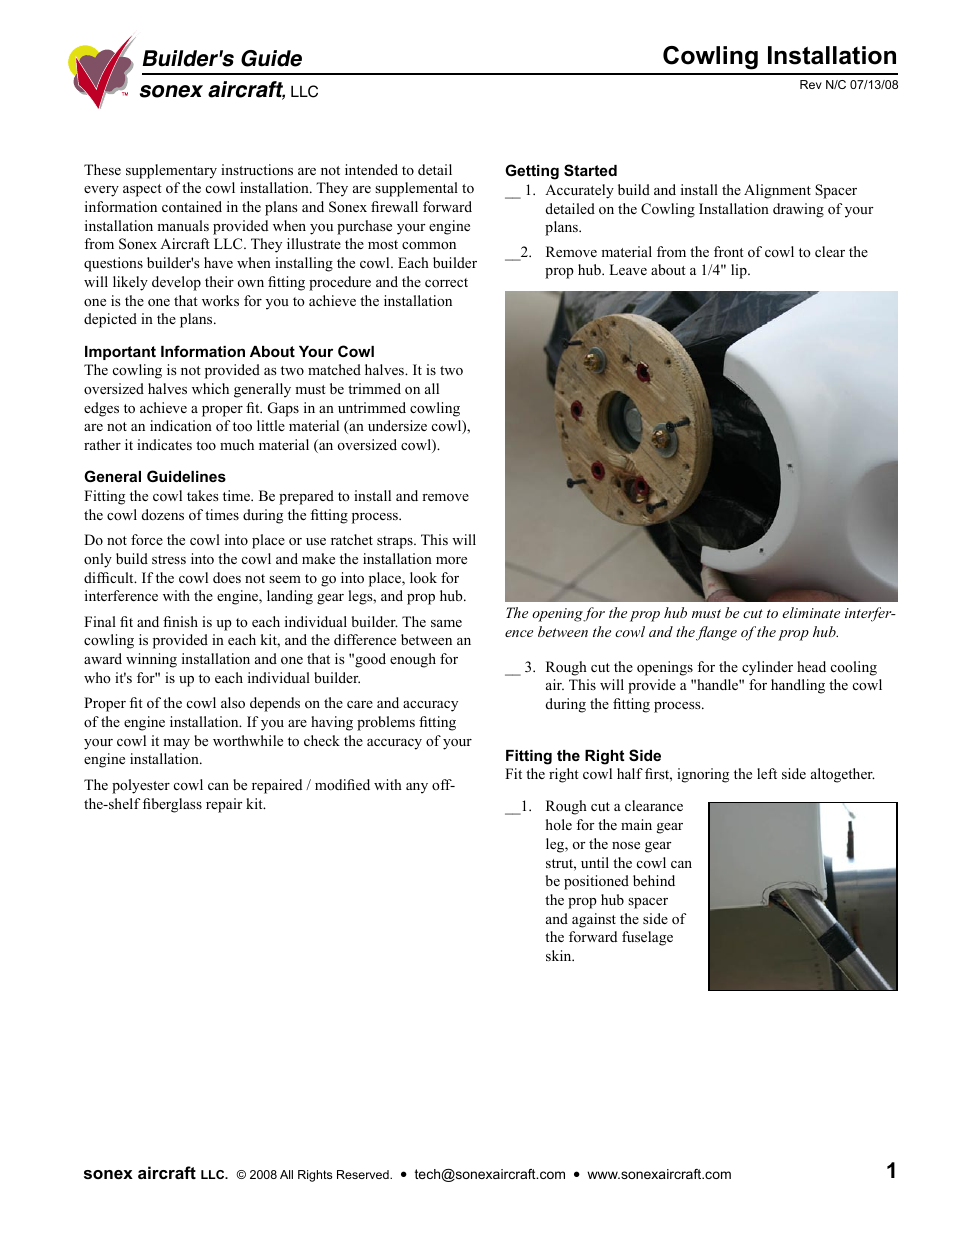 Cowling Installation Instructions